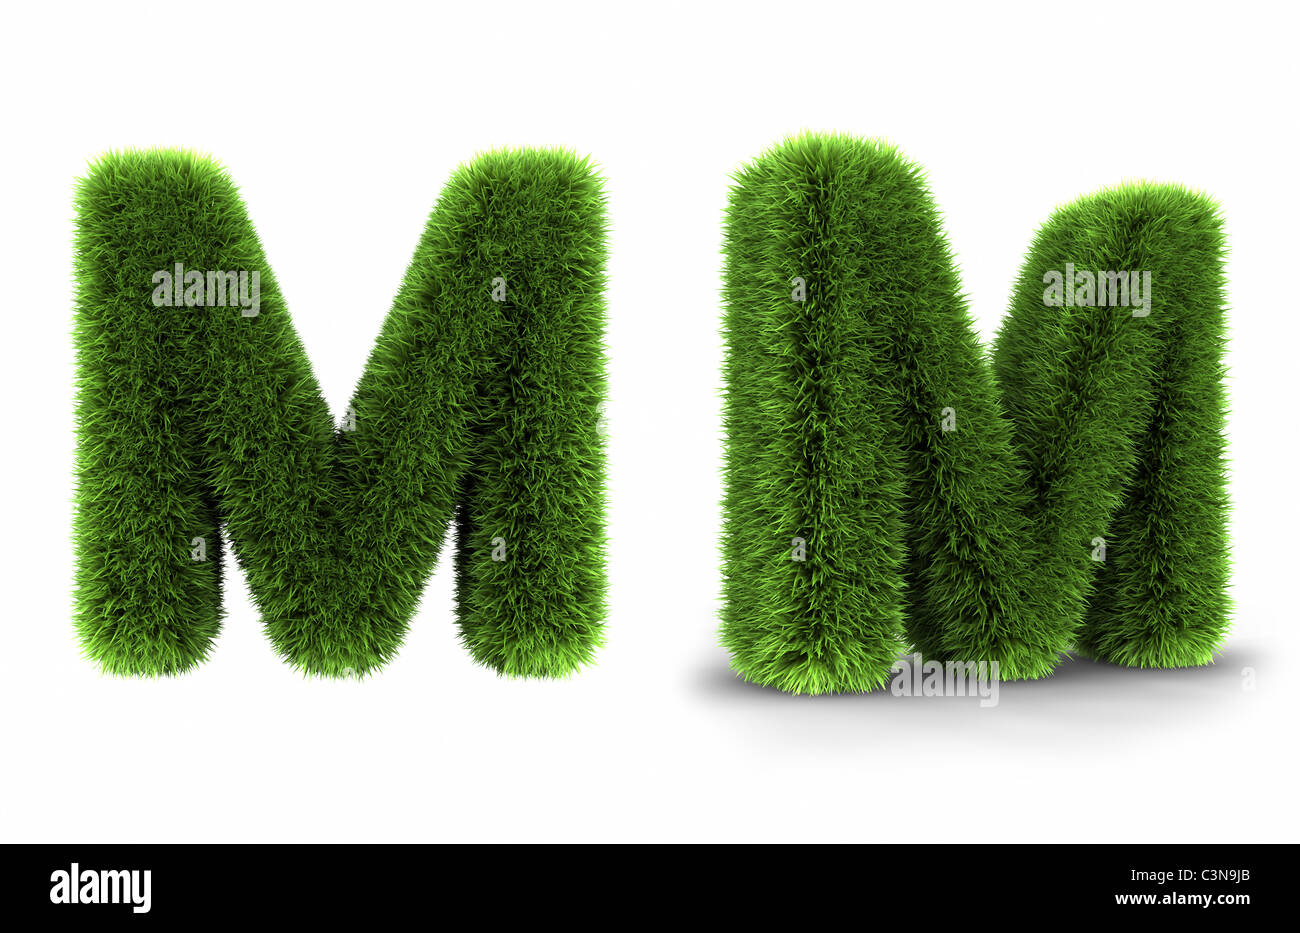 Grass letter m, isolated on white background Stock Photo